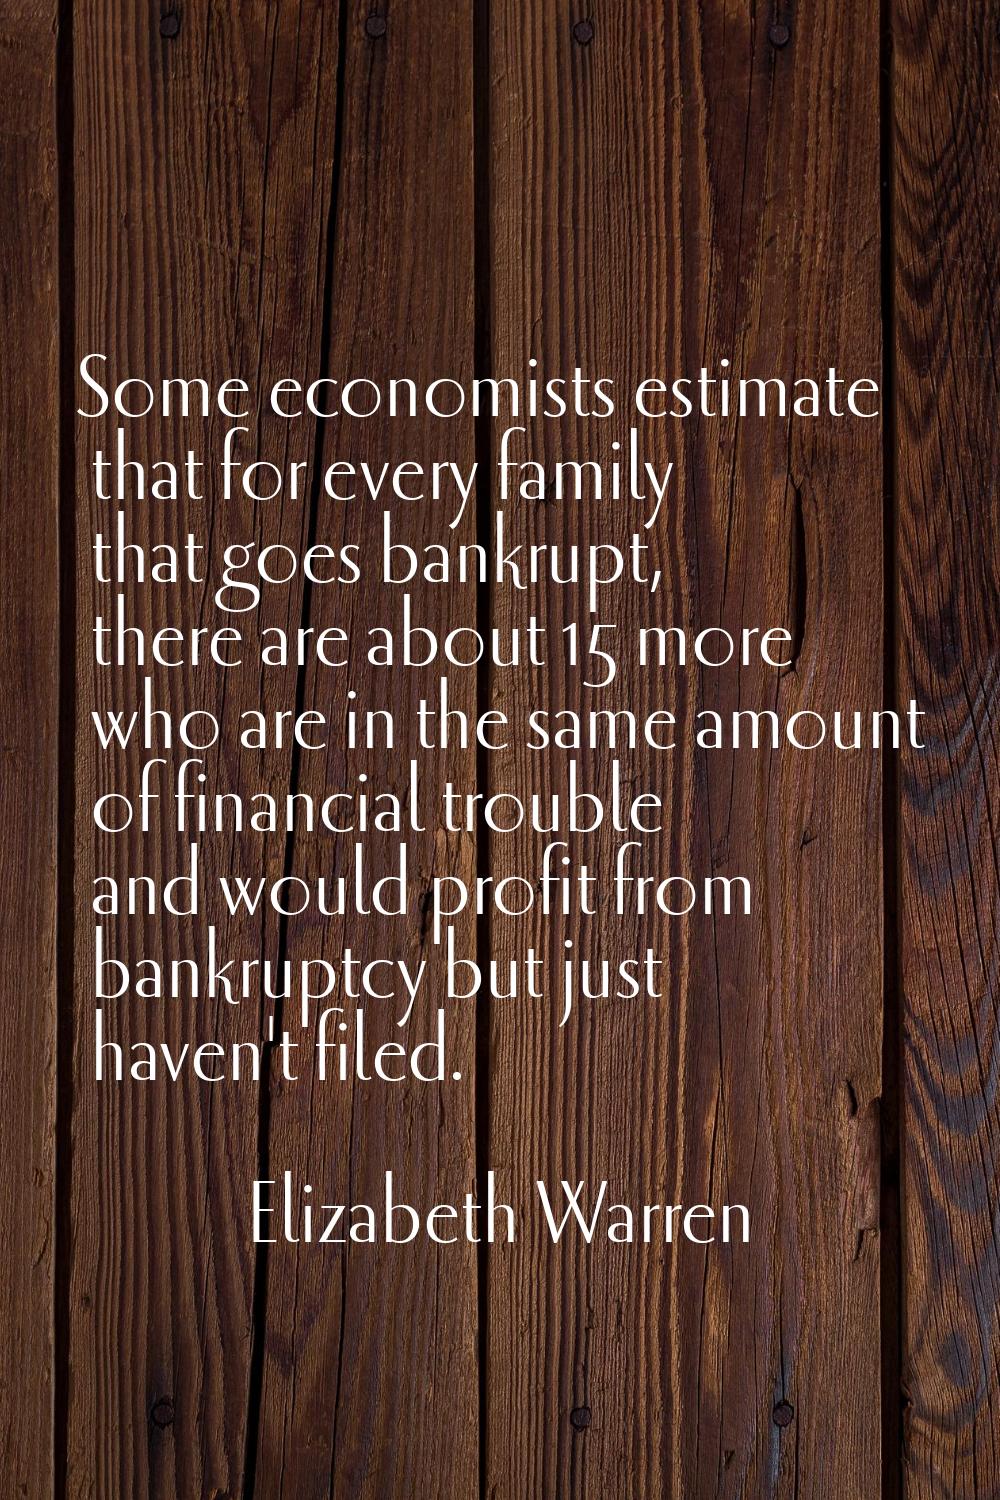 Some economists estimate that for every family that goes bankrupt, there are about 15 more who are 